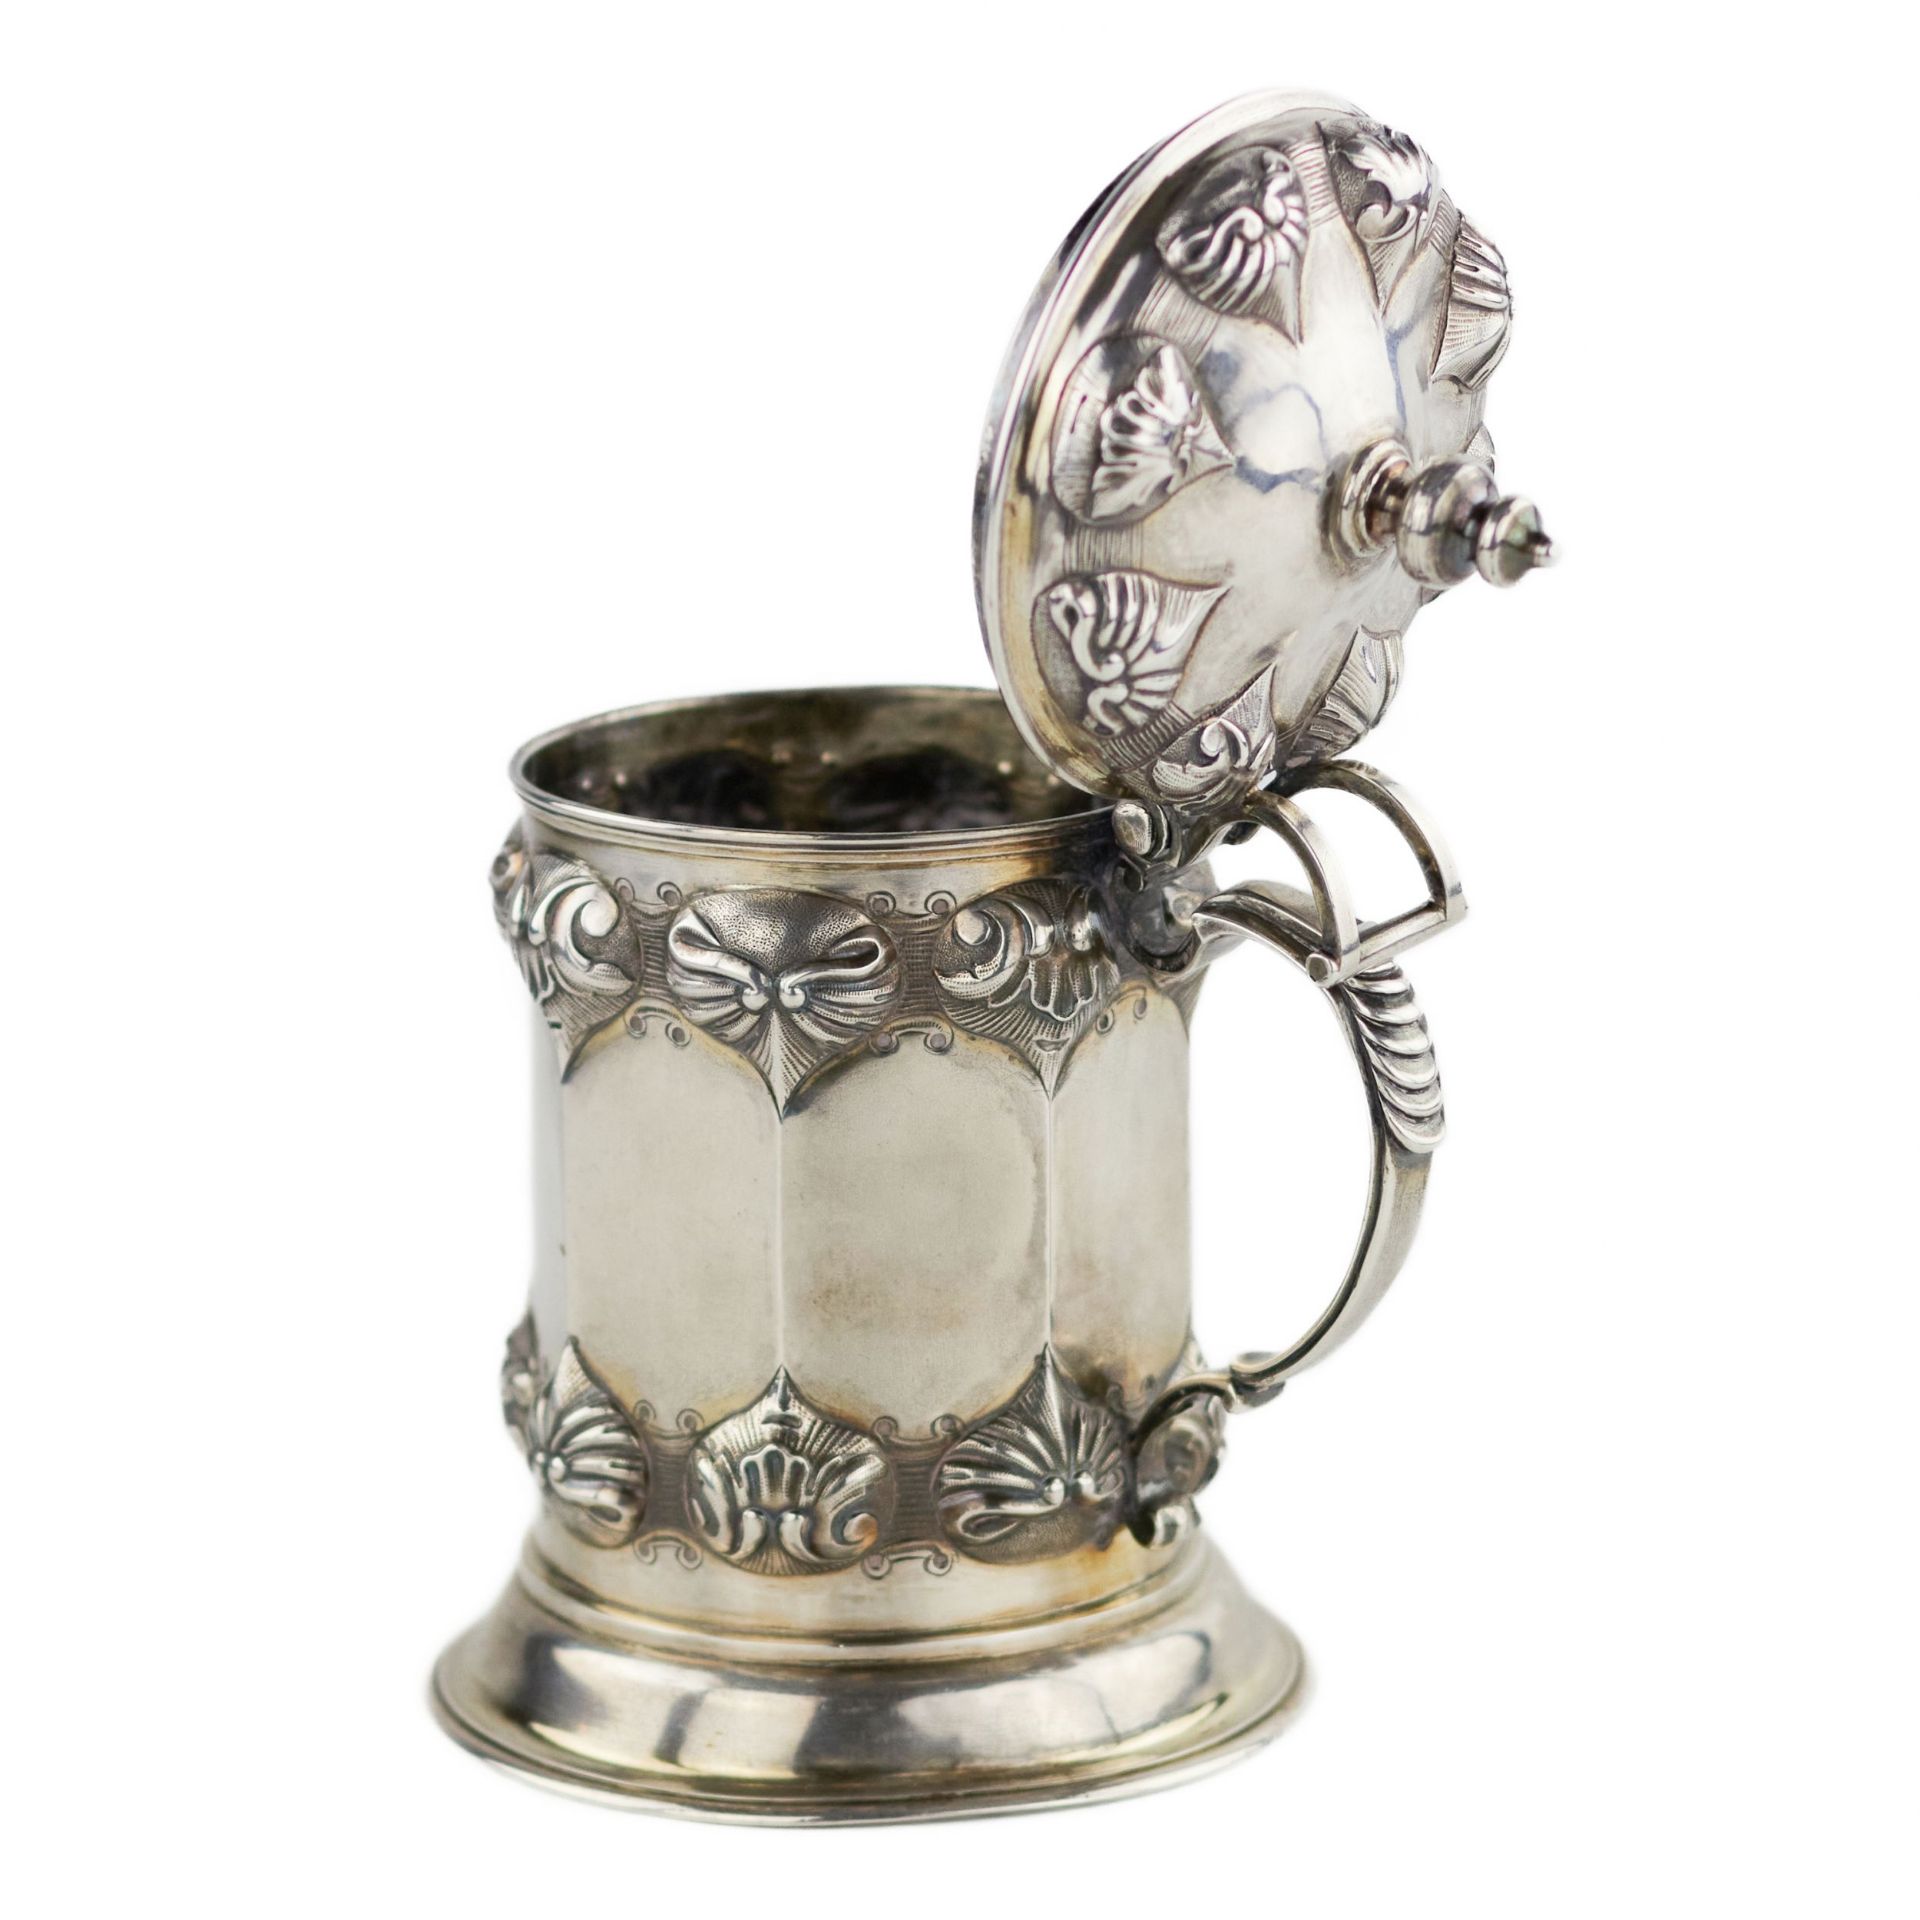 I. Nordberg. Russian, silver mug in the style of Roman-Gothic historicism. Petersburg. 1839 - Bild 3 aus 9